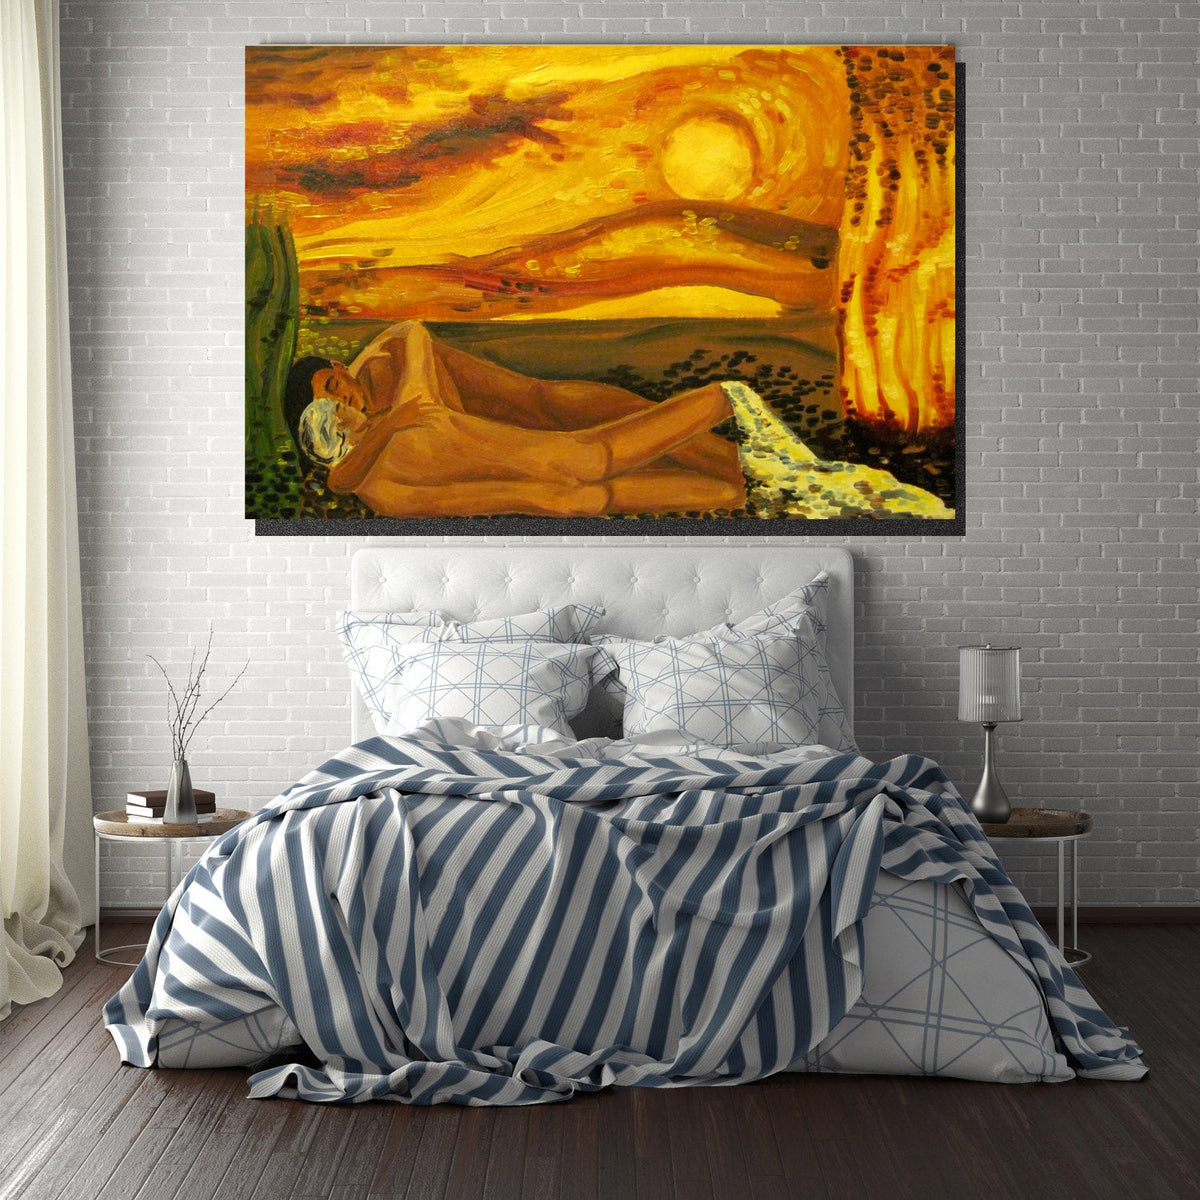 https://cdn.shopify.com/s/files/1/0387/9986/8044/products/CoupleatSunsetCanvasArtprintStretched-1.jpg